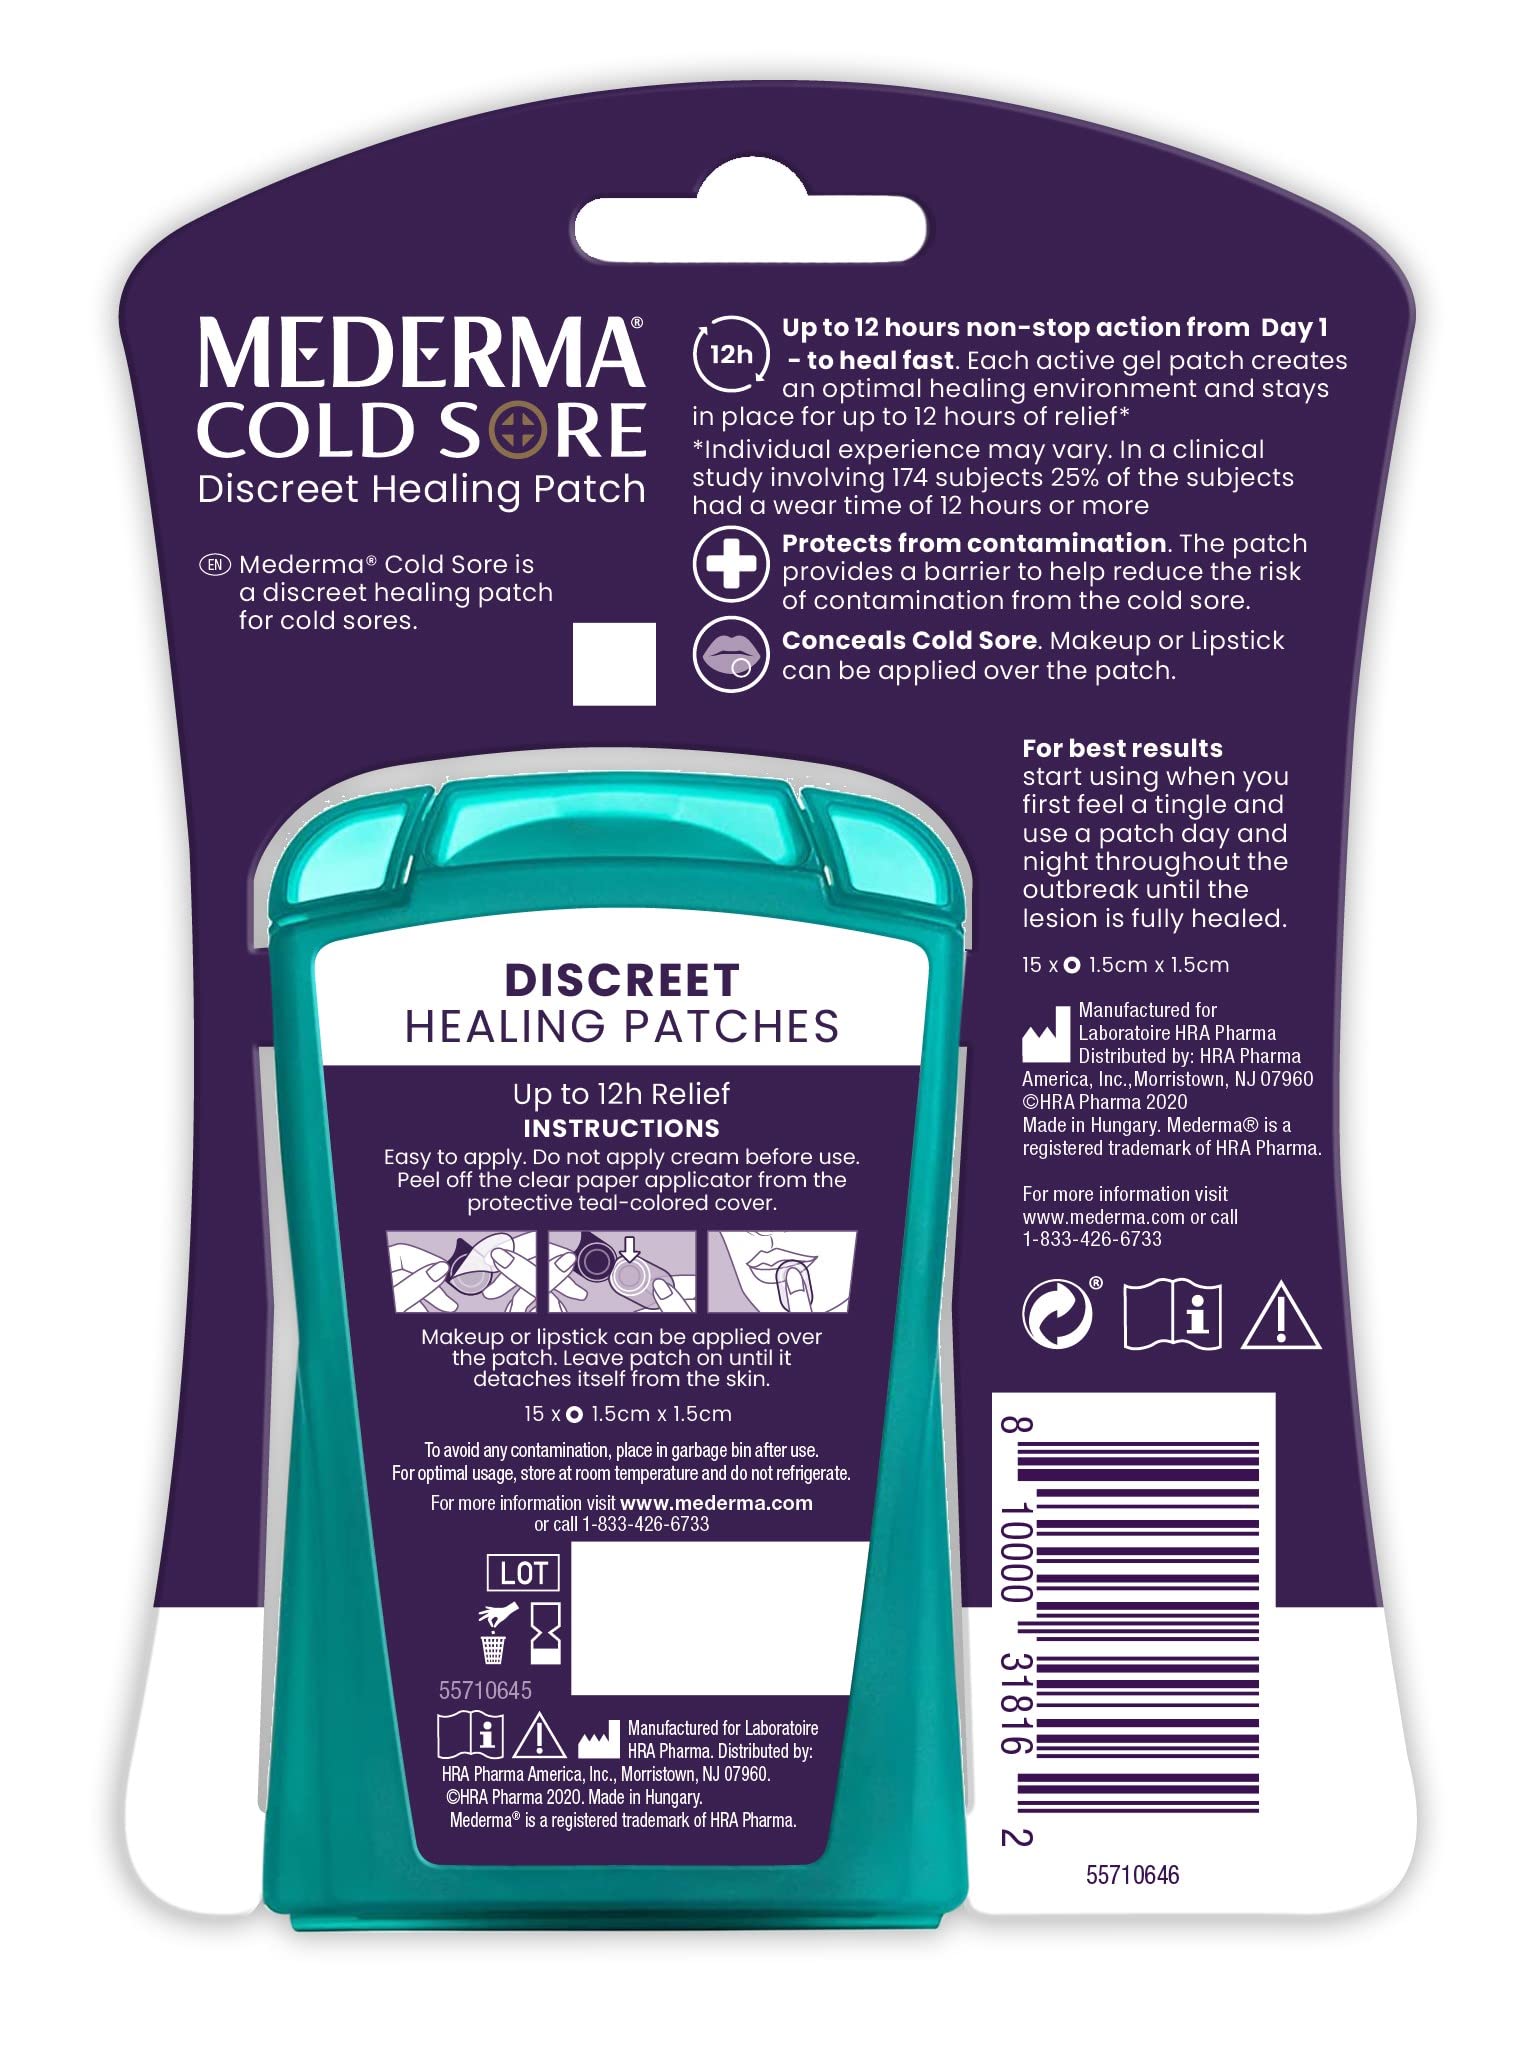 Mederma Fever Blister Discreet Healing Patch - A Patch That Protects and Conceals Cold Sores & Campho-Phenique Cold Sore and Fever Blister Treatment for Lips